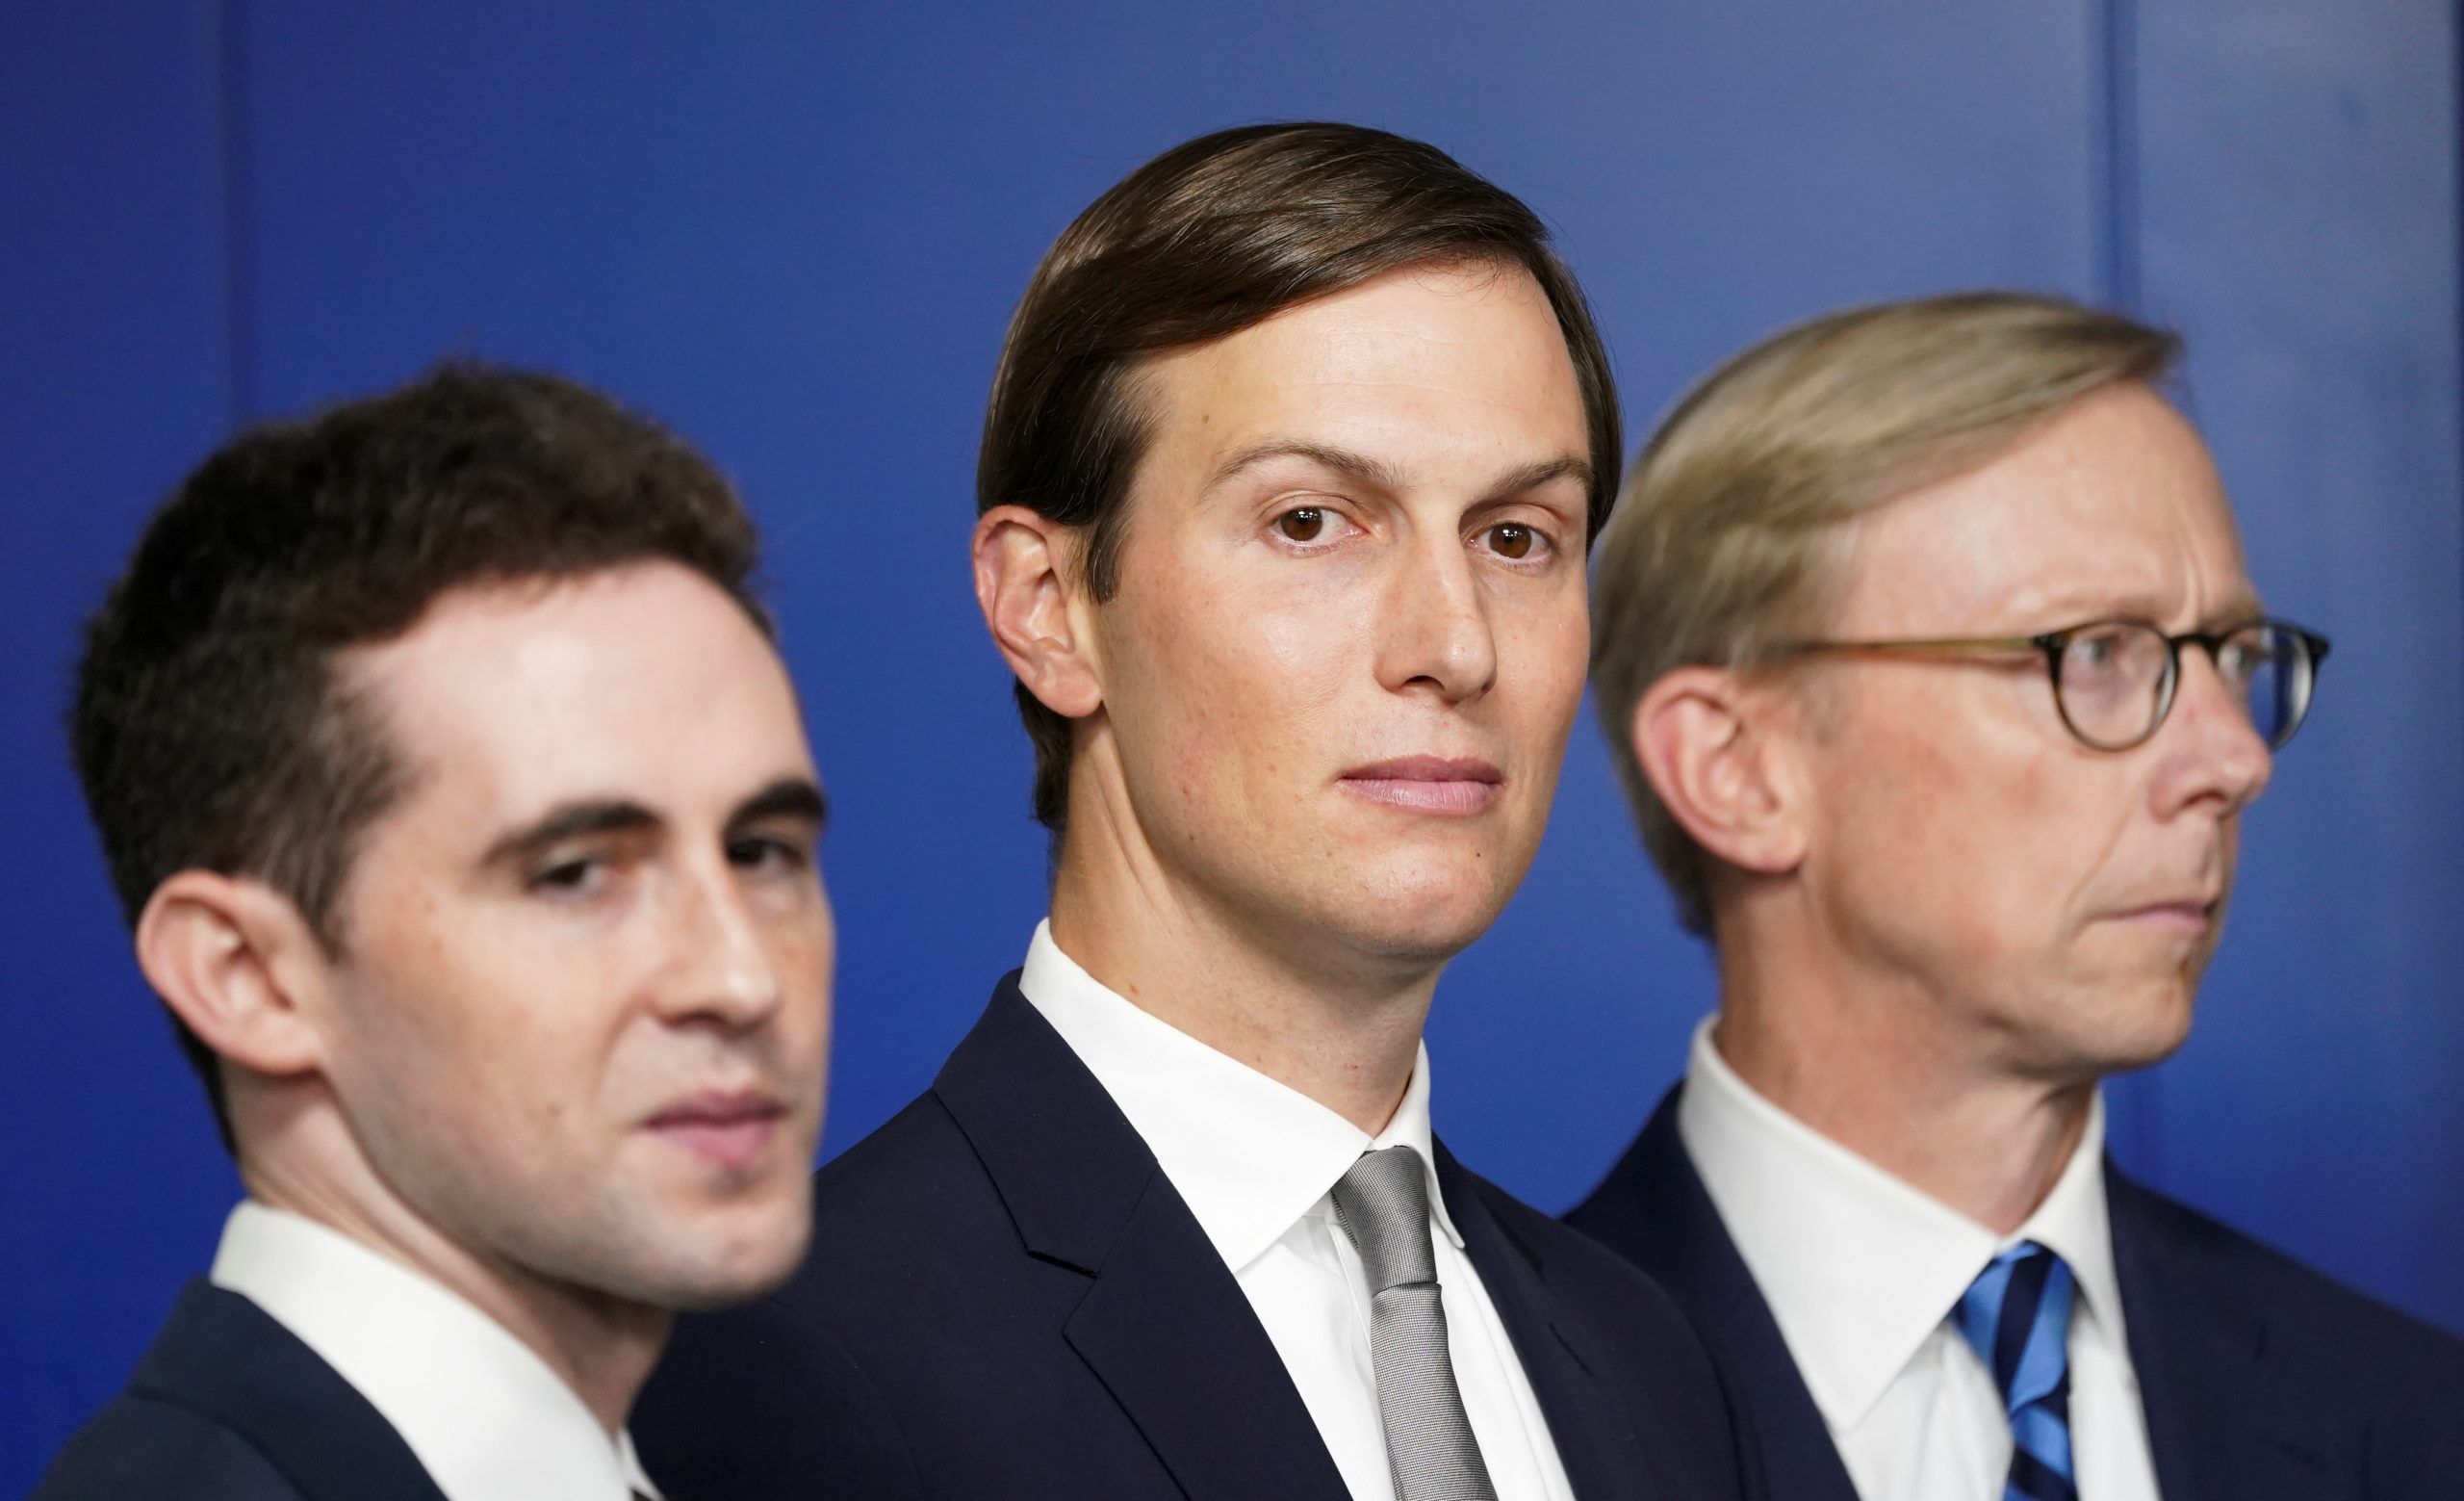 White House adviser Jared Kushner, flanked by aide Avi Berkowitz (L) and Brian Hook, former U.S. envoy to Iran, during a press briefing on the agreement between Israel and the United Arab Emirates at White House in Washington, U.S., August 13, 2020.  REUTERS/Kevin Lamarque